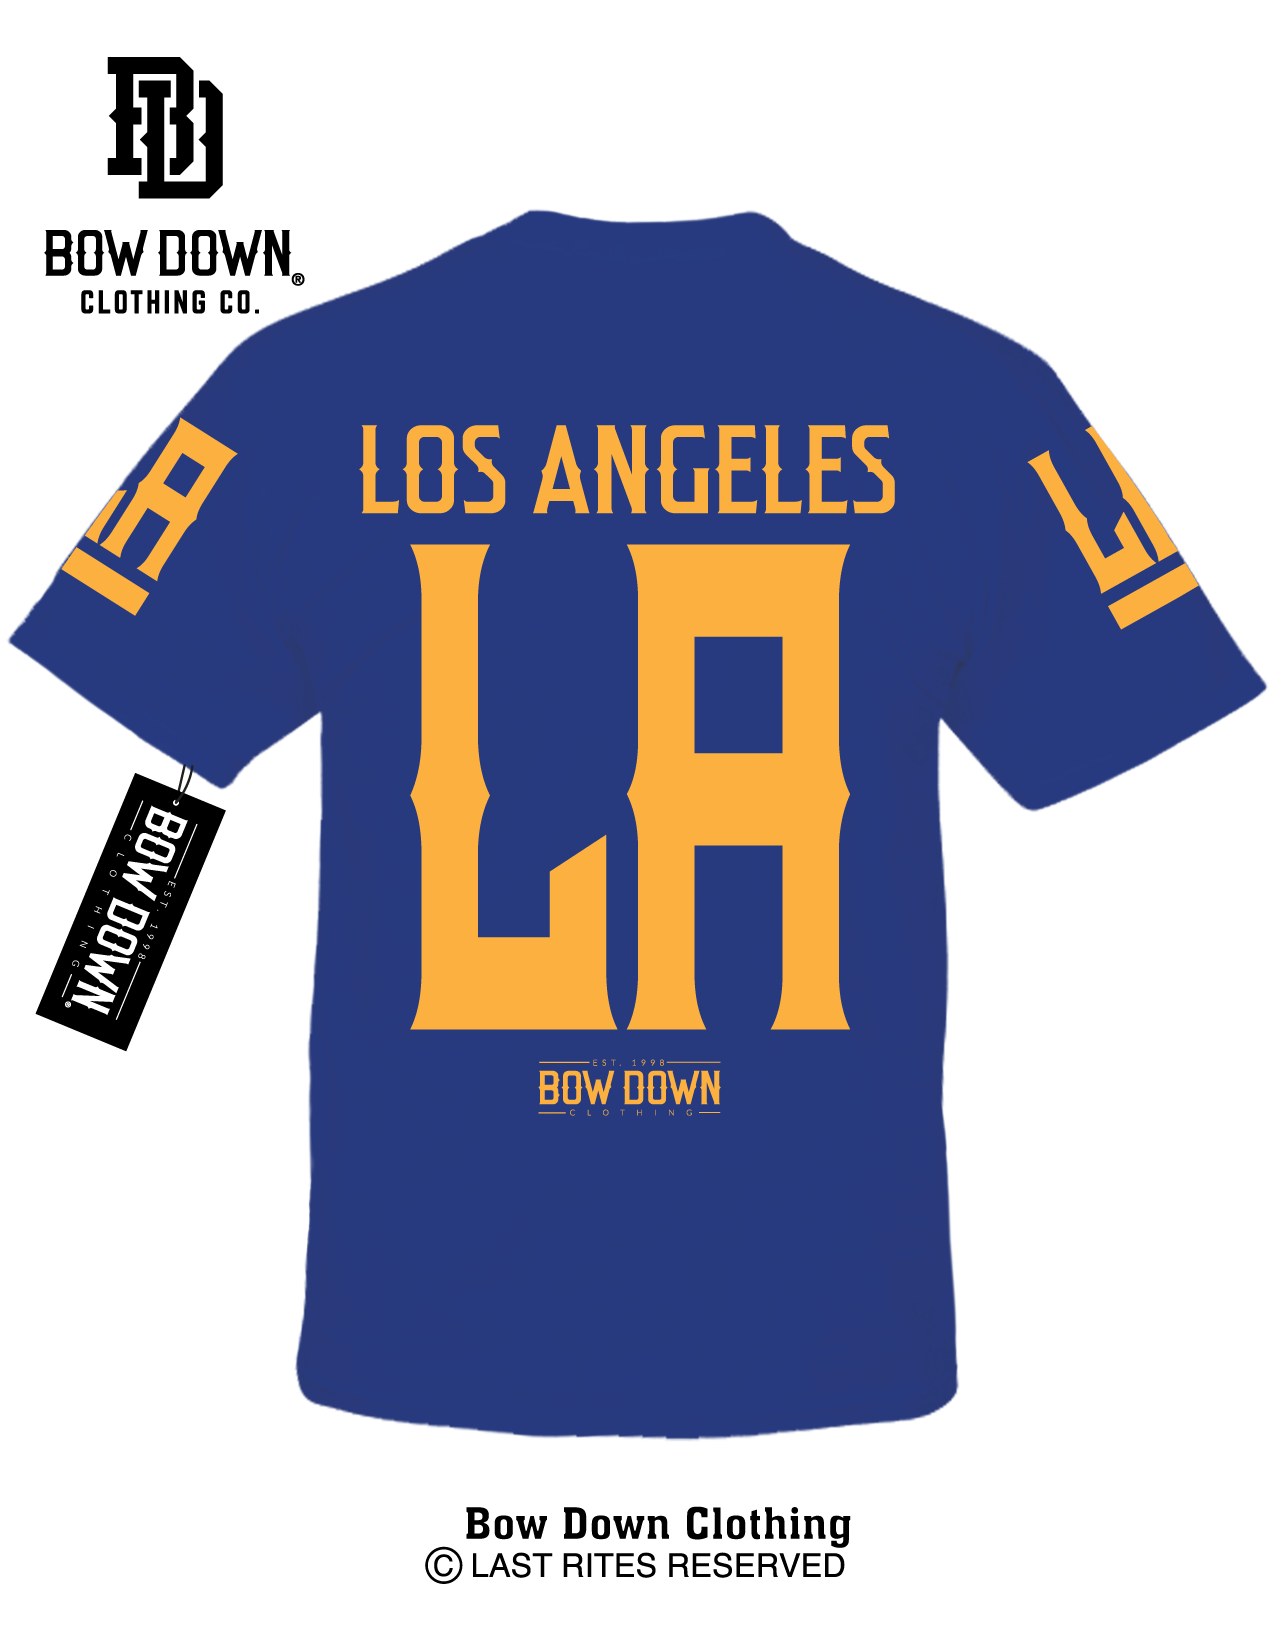 LOS ANGELES JERSEY - GOLD ON ROYAL BLUE T-SHIRT